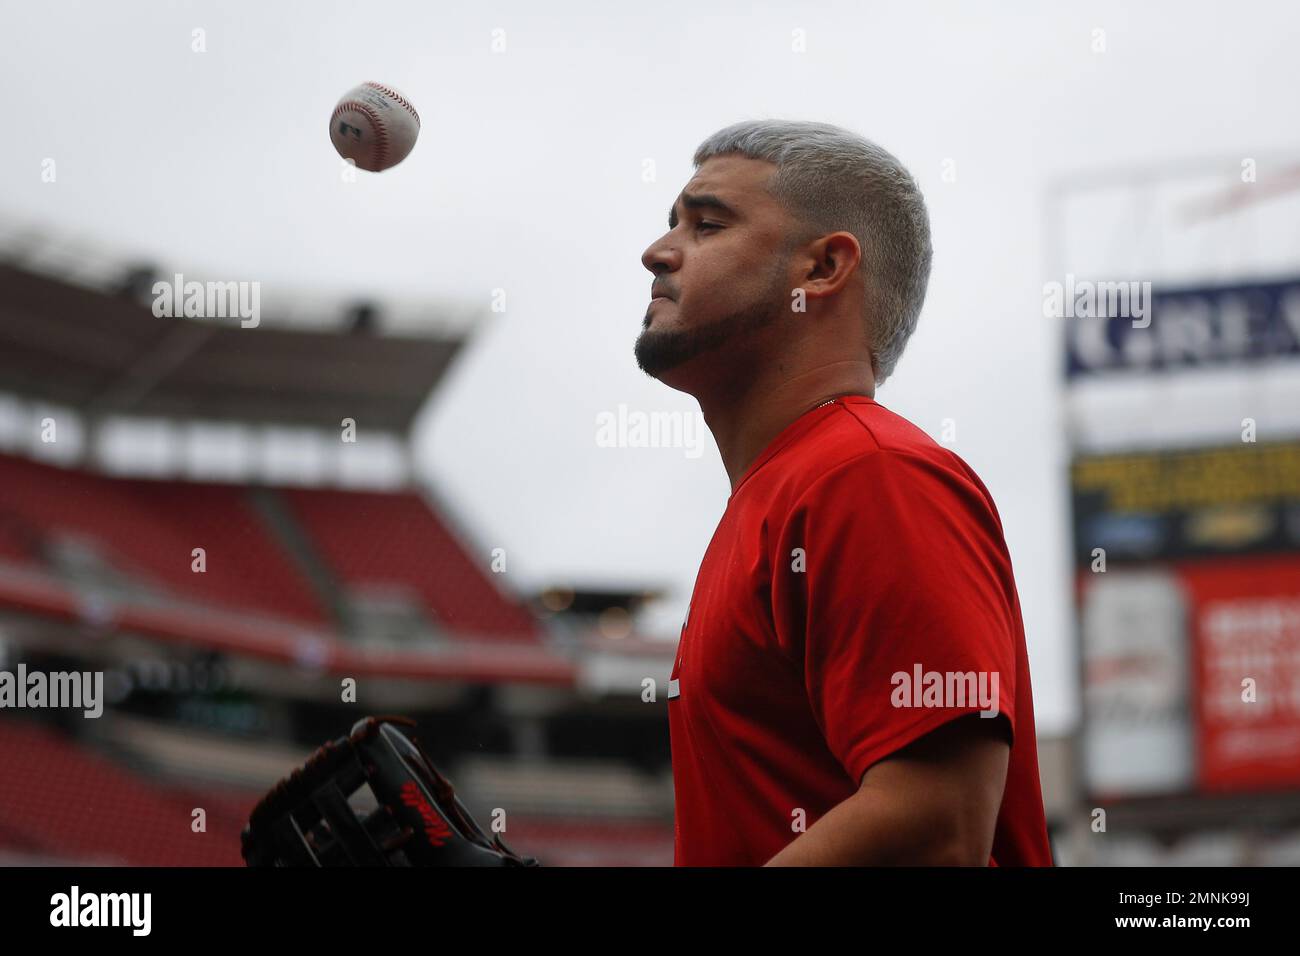 Cincinnati Reds infielder Eugenio Suarez (7) during game against the New  York Mets at Citi Field in Queens, New York, September 10, 2017. Reds  defeated Mets 10-5. (Tomasso DeRosa via AP Stock Photo - Alamy